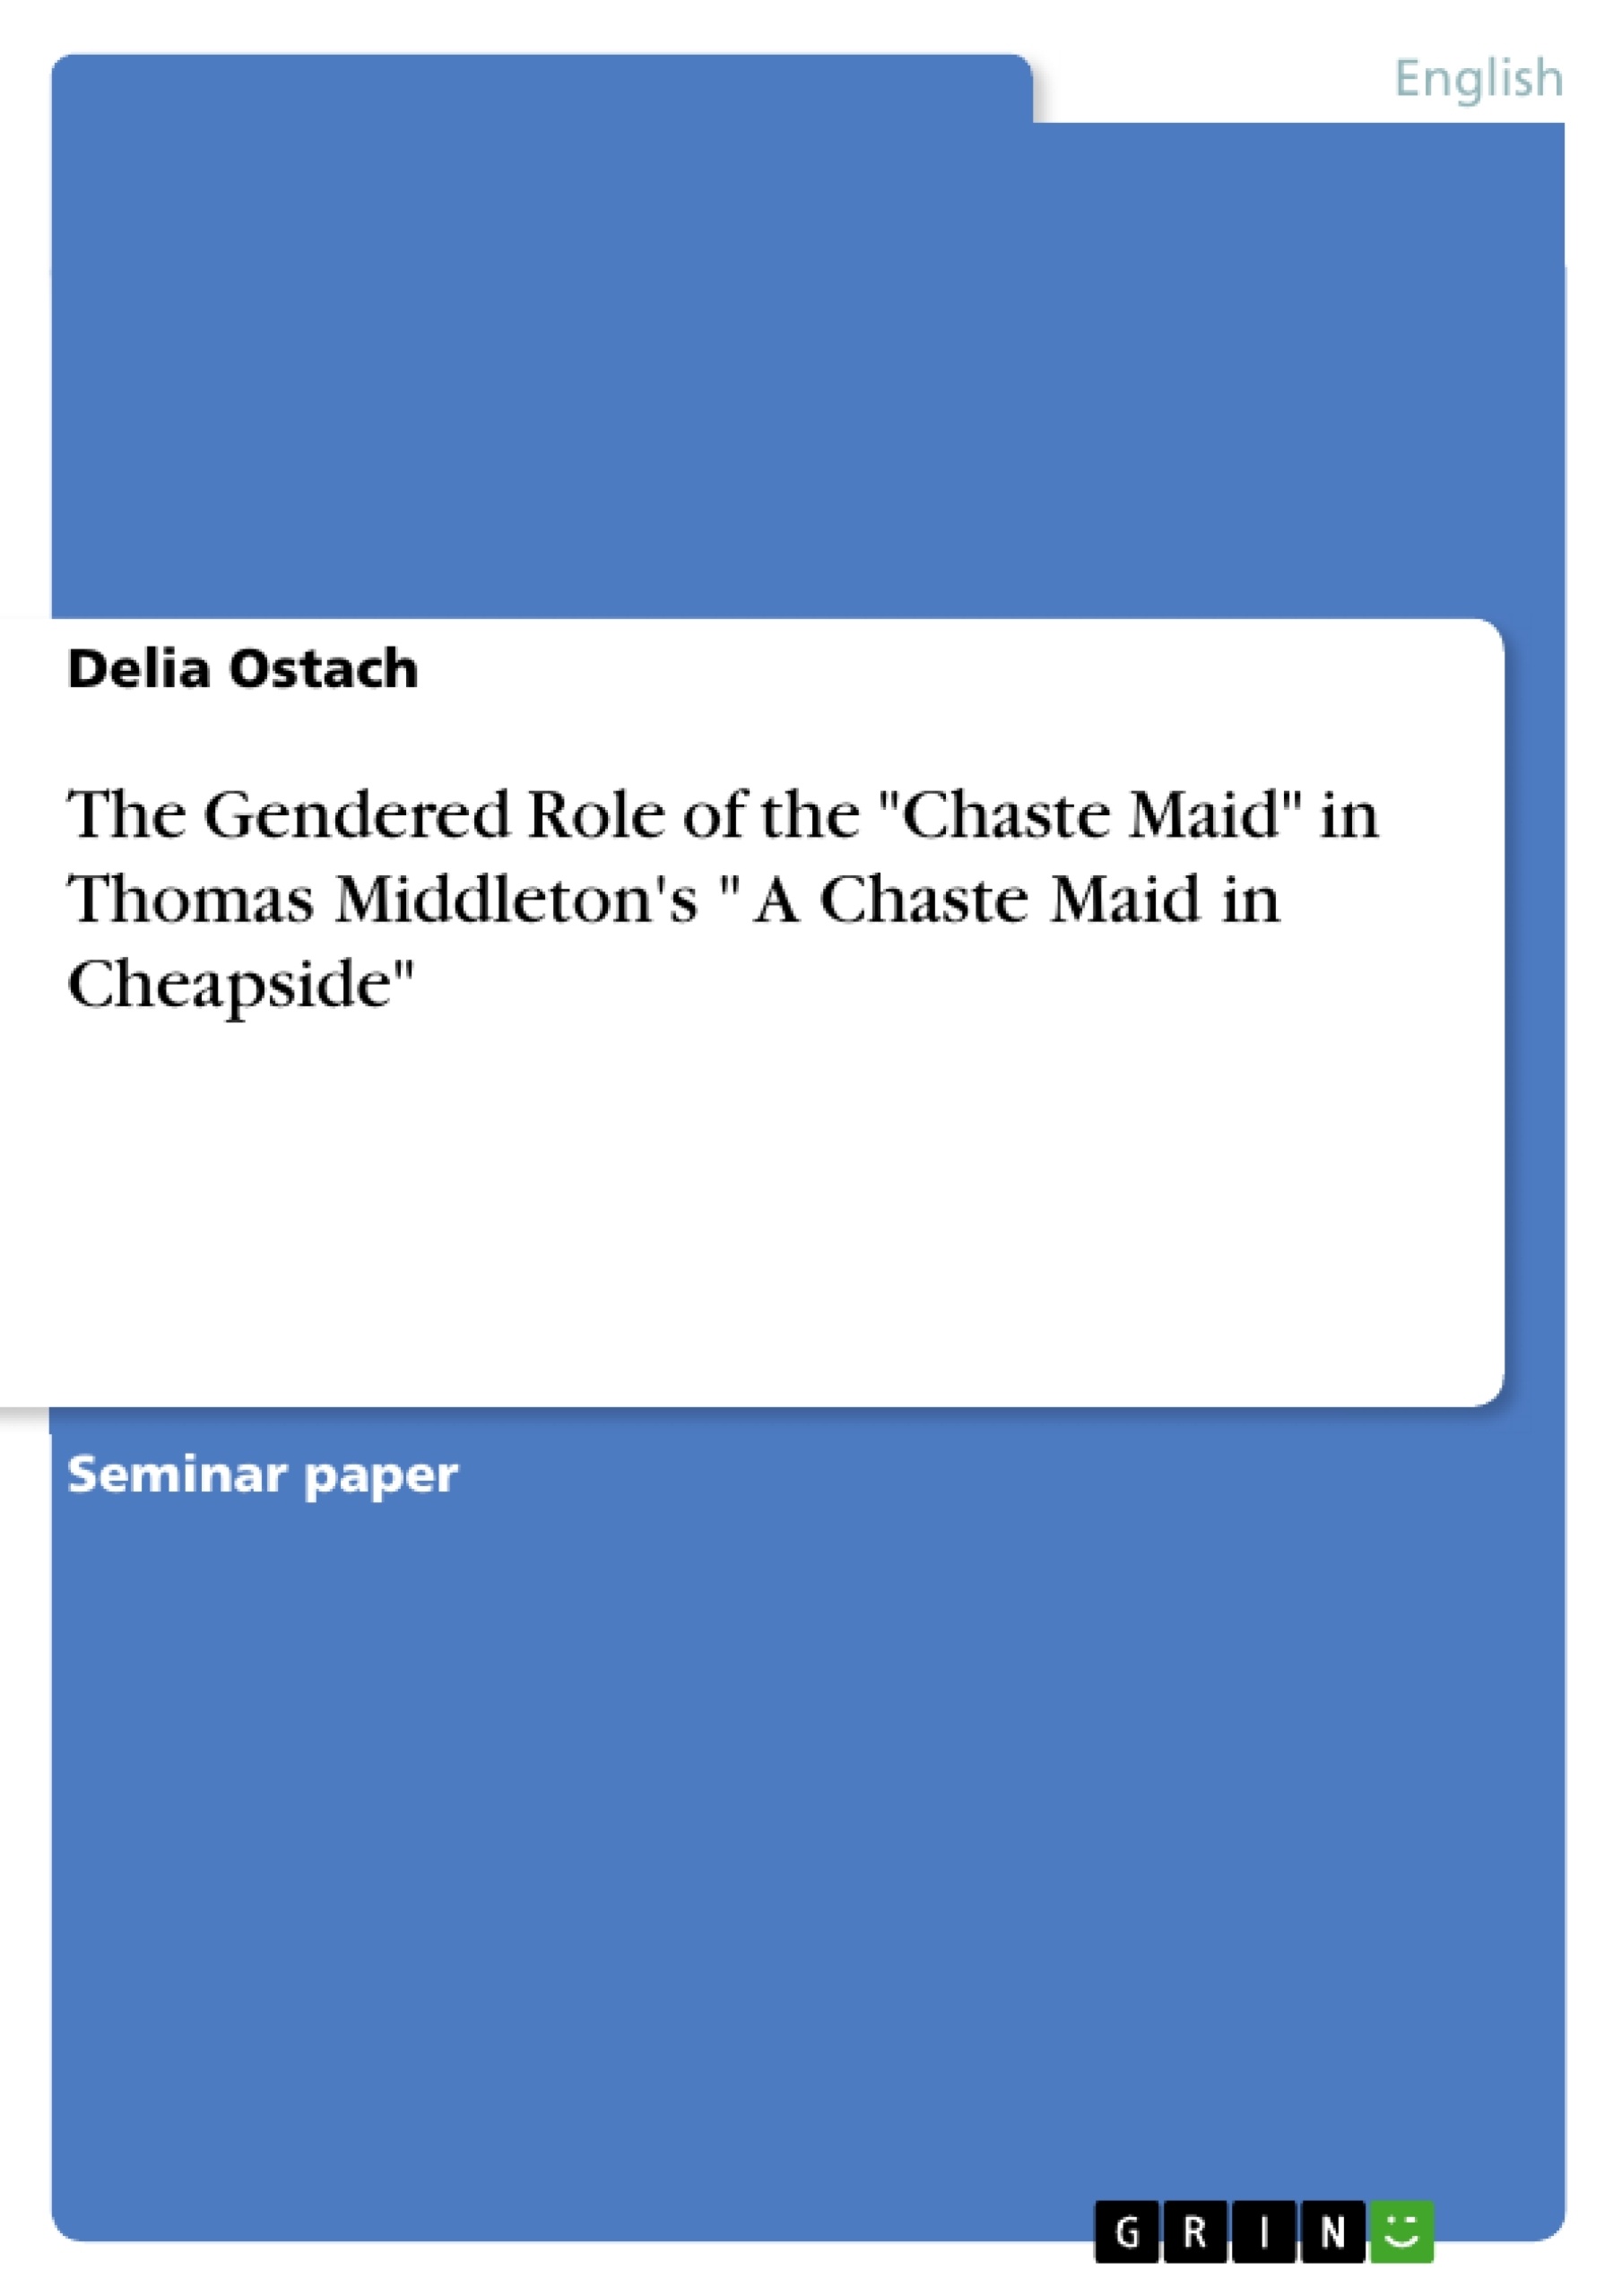 Titre: The Gendered Role of the "Chaste Maid" in Thomas Middleton's " A Chaste Maid in Cheapside"